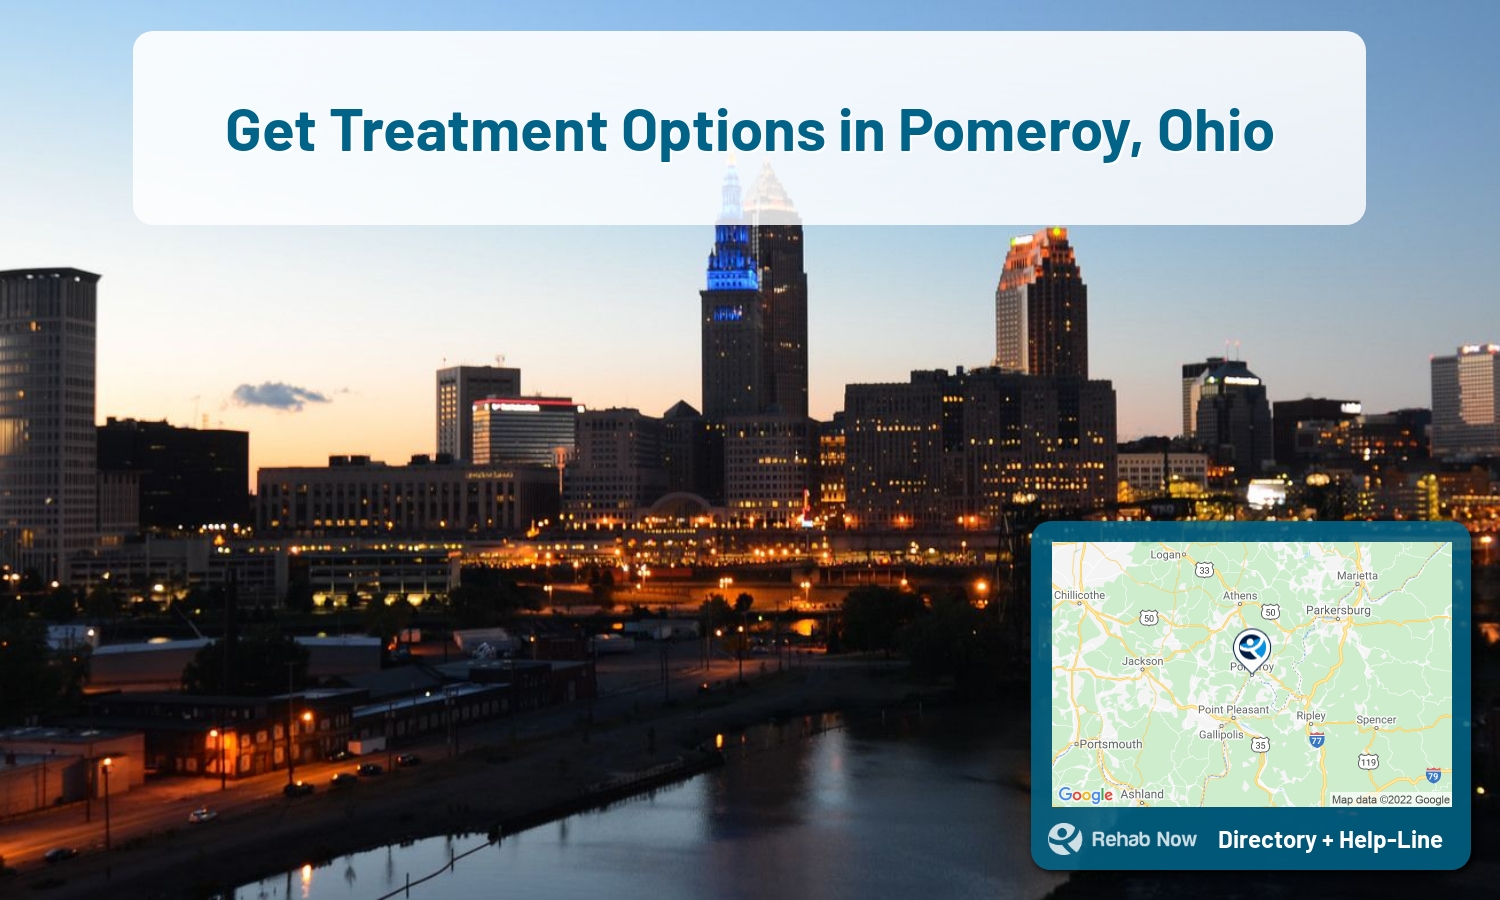 View options, availability, treatment methods, and more, for drug rehab and alcohol treatment in Pomeroy, Ohio